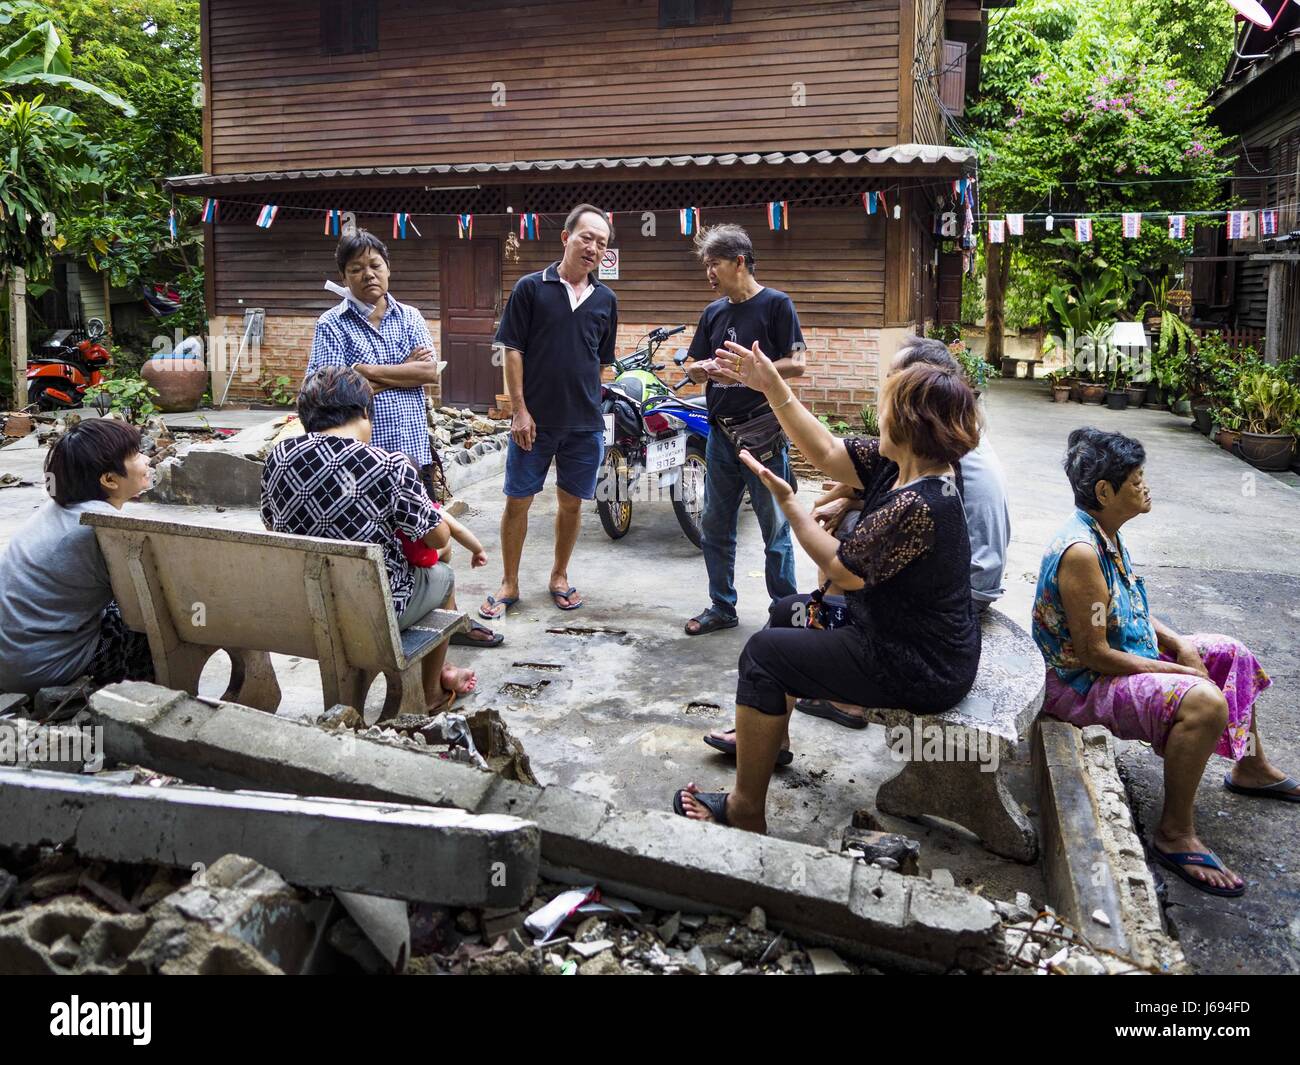 May 16, 2017 - Bangkok, Bangkok, Thailand - Residents of Pom Mahakan gather in an empty lot in the old fort. The lot used to be a family home. The family was evicted by city officials in March, 2017 and the structure torn down. The final evictions of the remaining families in Pom Mahakan, a slum community in a 19th century fort in Bangkok, have started. City officials are moving the residents out of the fort. NGOs and historic preservation organizations protested the city's action but city officials did not relent and started evicting the remaining families in early March. (Credit Image: © Jac Stock Photo